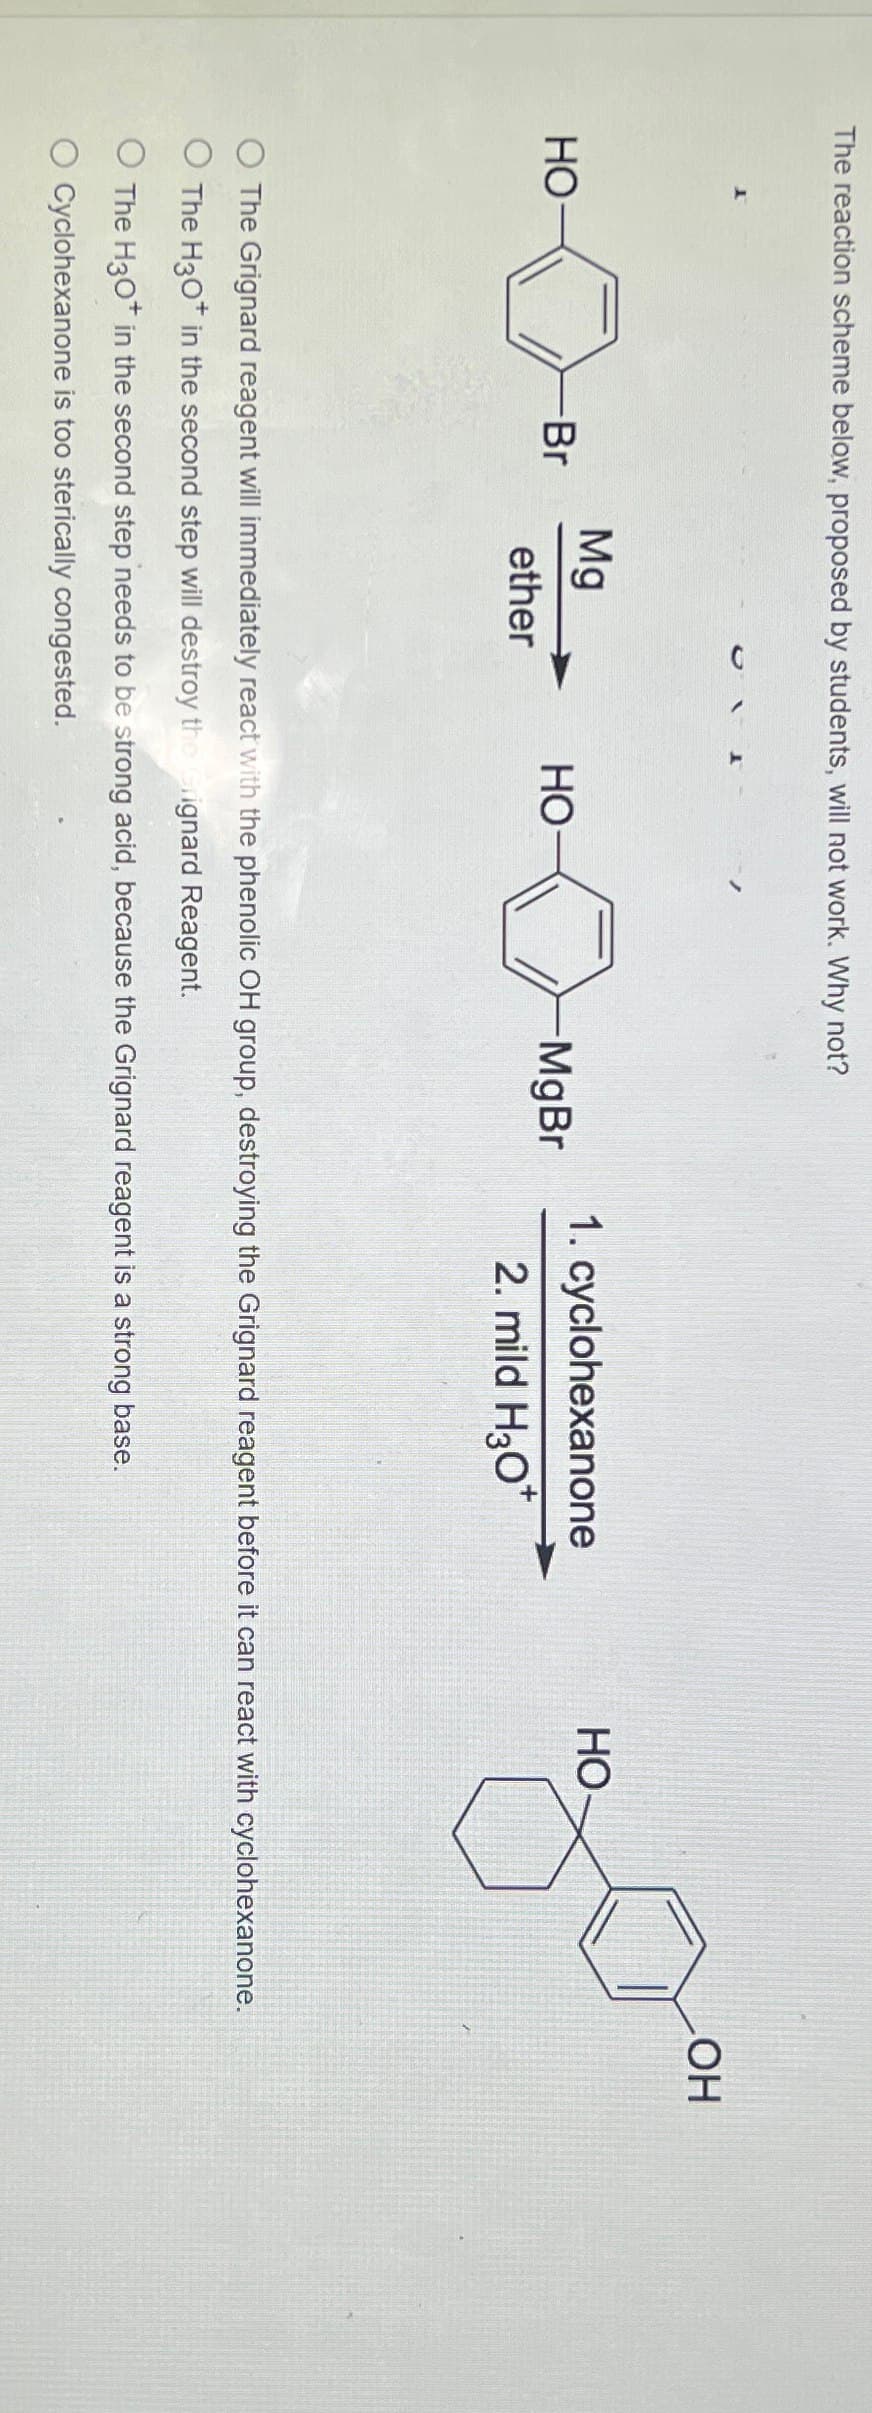 The reaction scheme below, proposed by students, will not work. Why not?
HO
-Br
OH
Mg
HO
-MgBr
ether
1. cyclohexanone
2. mild H3O+
HO
O The Grignard reagent will immediately react with the phenolic OH group, destroying the Grignard reagent before it can react with cyclohexanone.
O The H30+ in the second step will destroy the erignard Reagent.
O The H3O+ in the second step needs to be strong acid, because the Grignard reagent is a strong base.
O Cyclohexanone is too sterically congested.